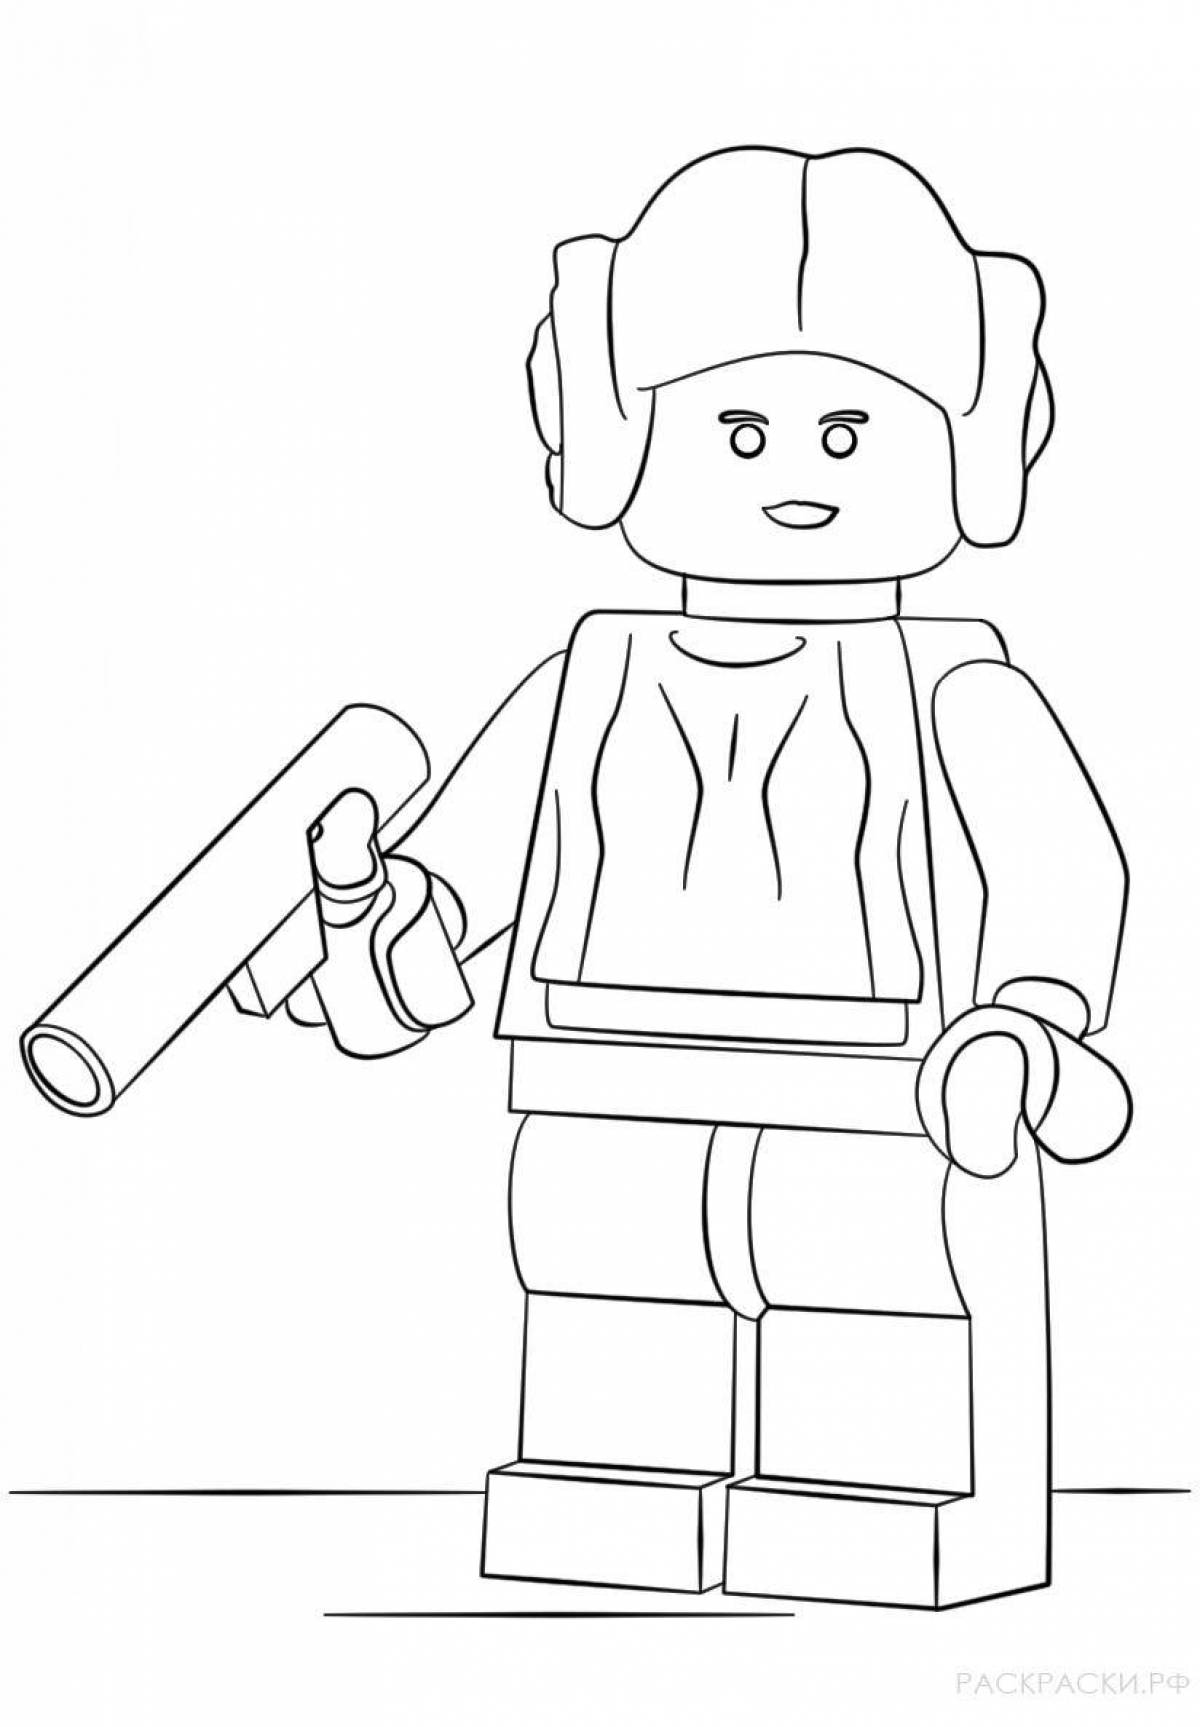 Amazing lego men coloring pages for kids